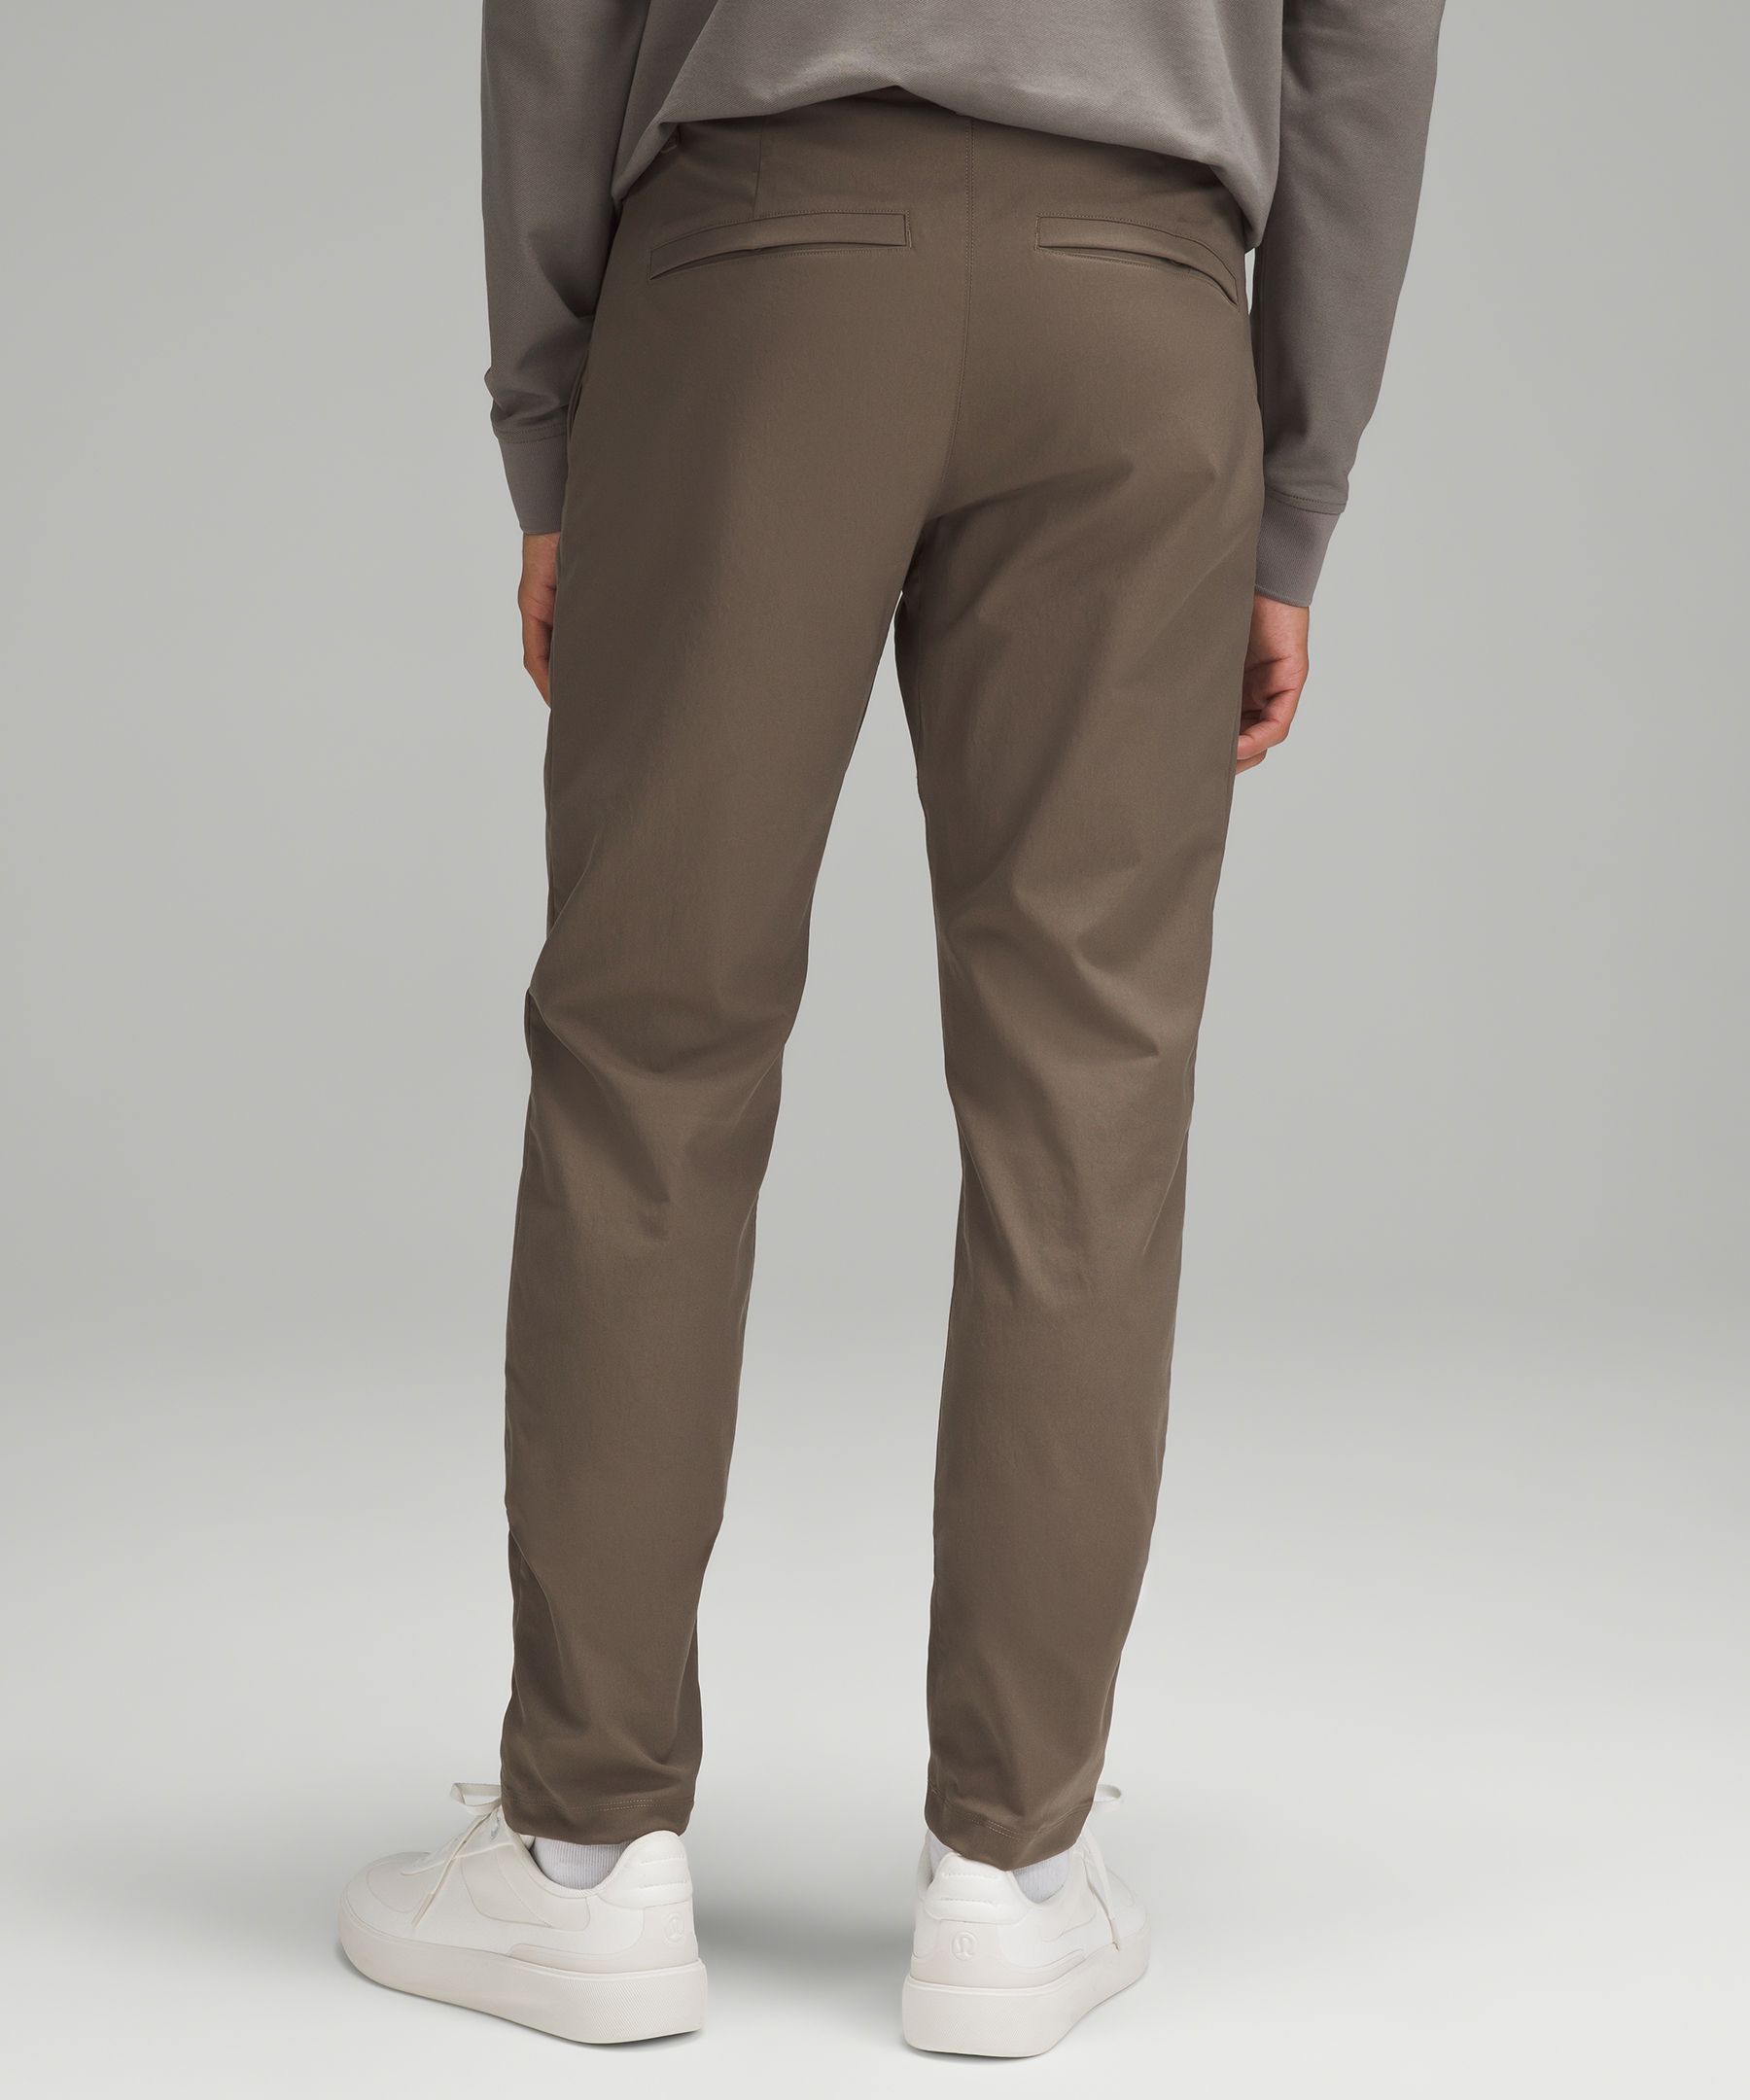 Shop Lululemon Abc Slim-fit Trousers 30"l Smooth Twill